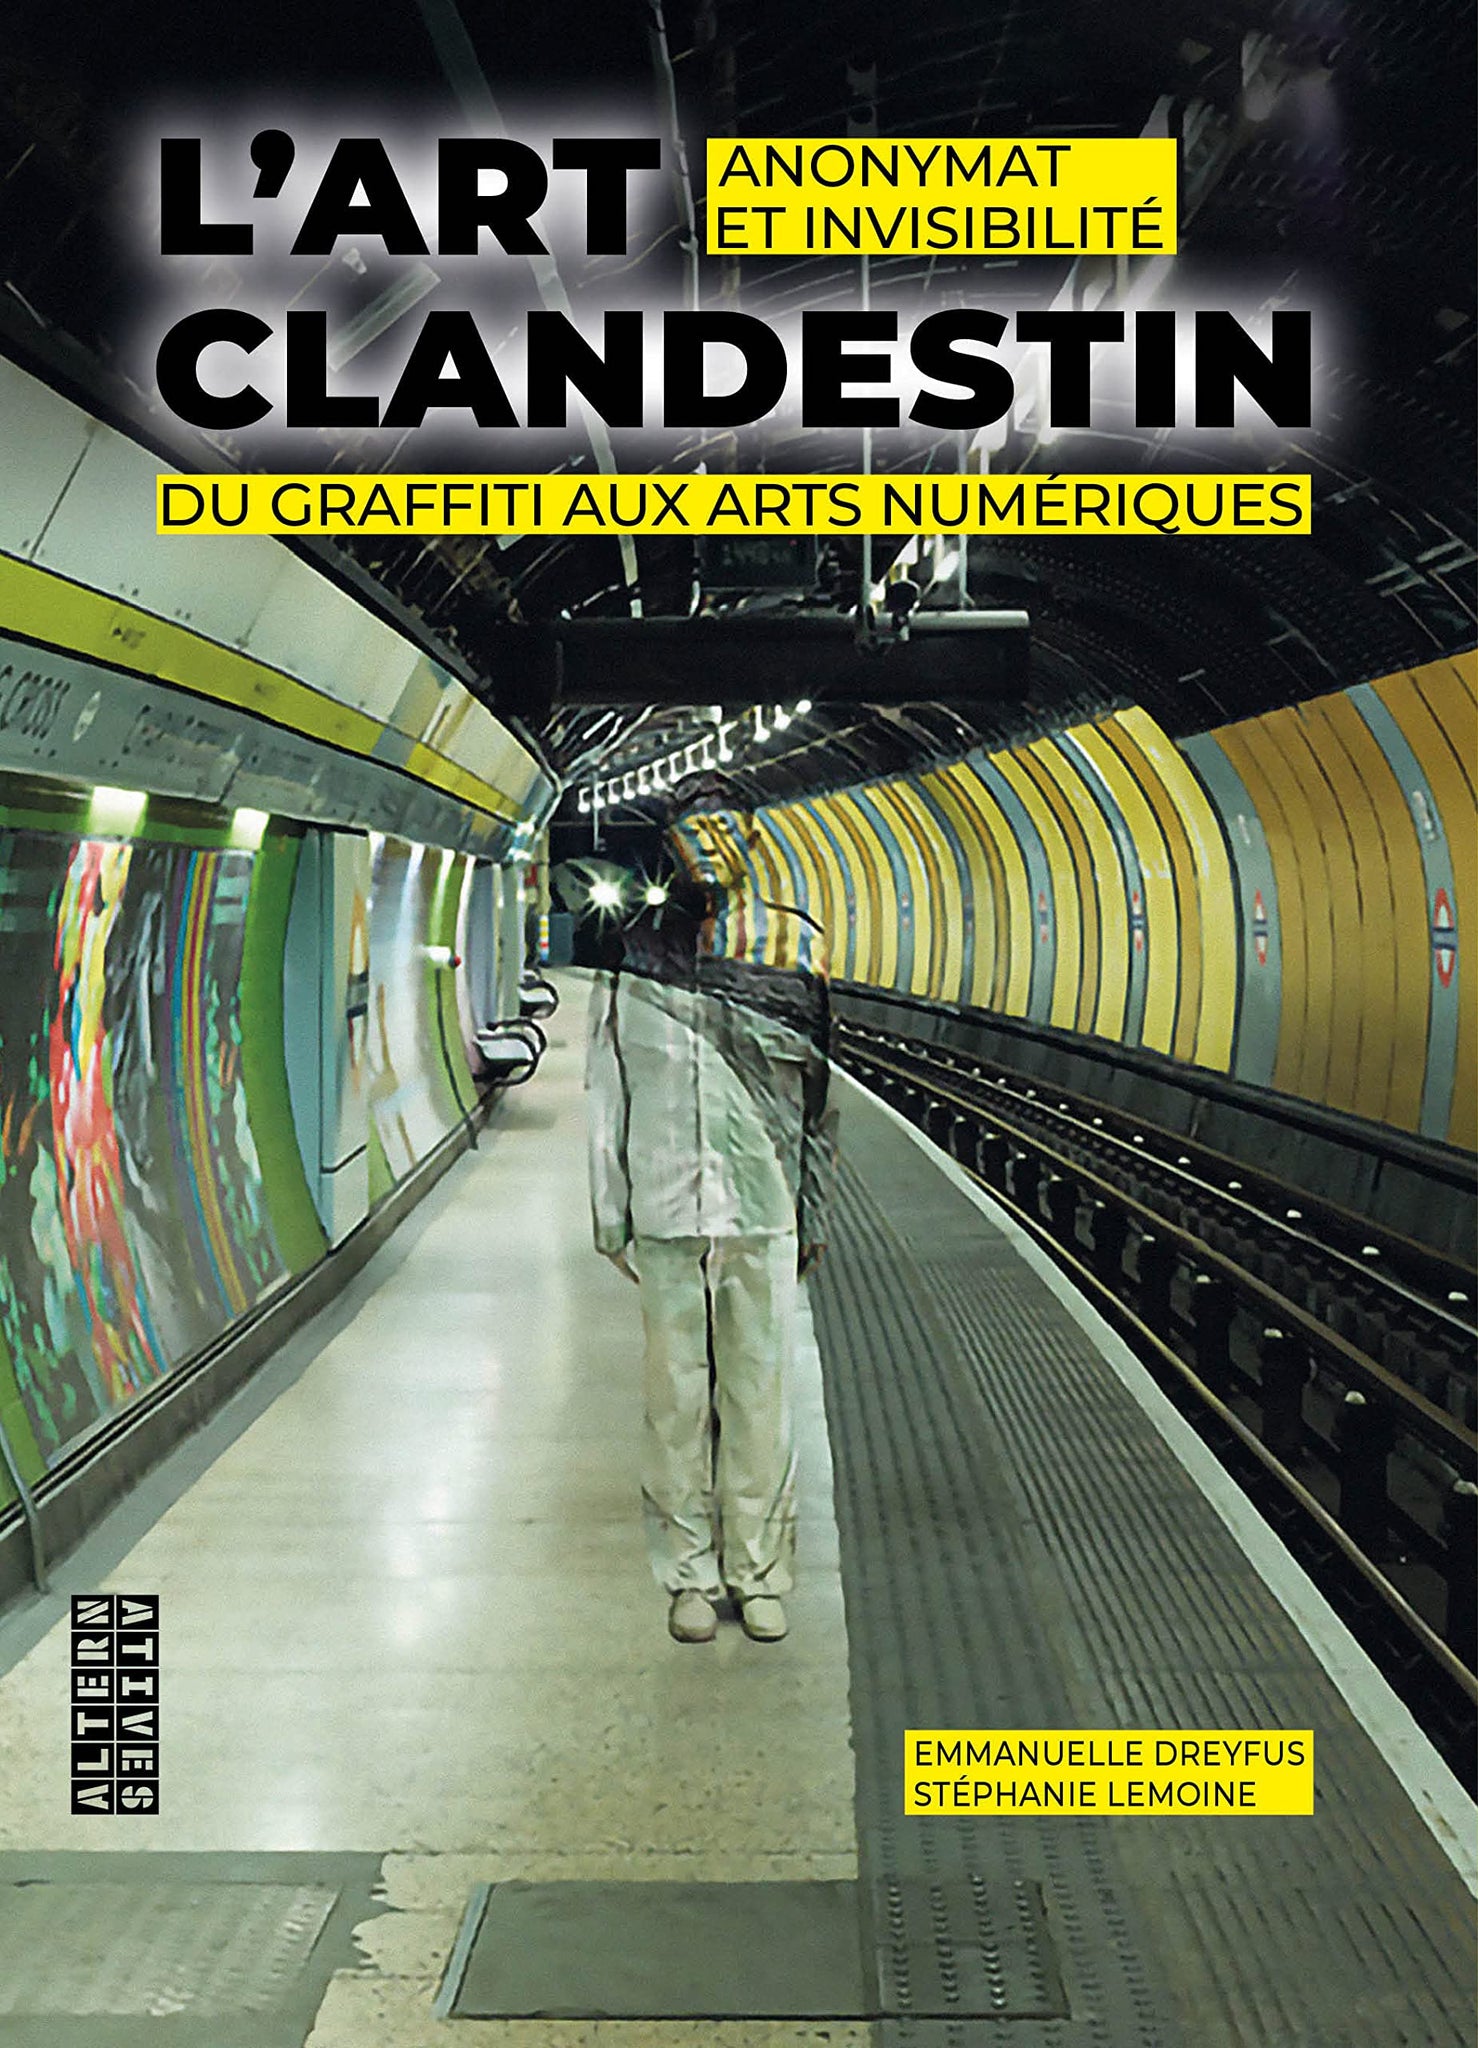 Clandestine Art: Anonymity and Invisibility from Graffiti to Digital Arts